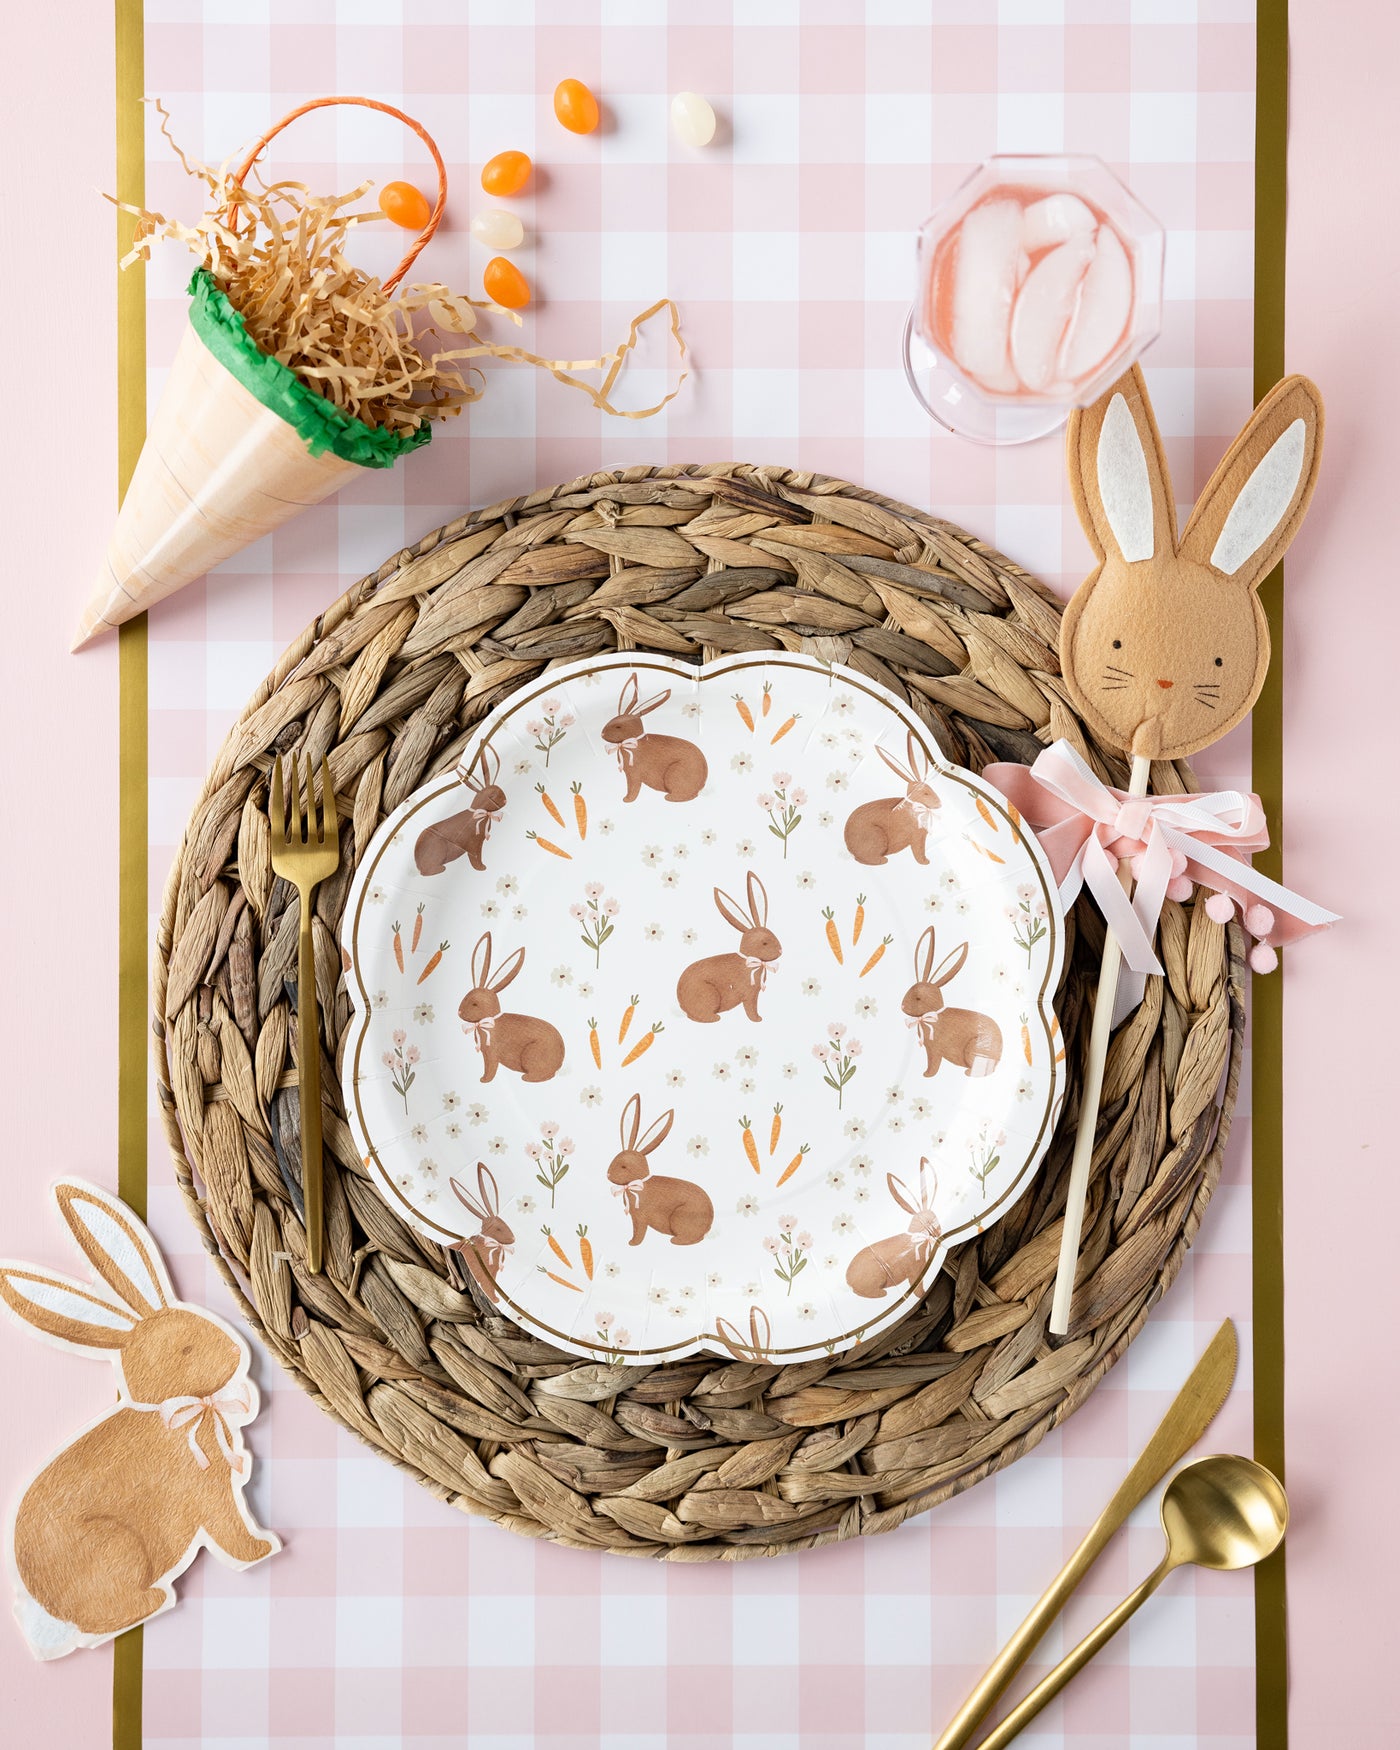 Occasions By Shakira - Rabbit Scatter Paper Plate